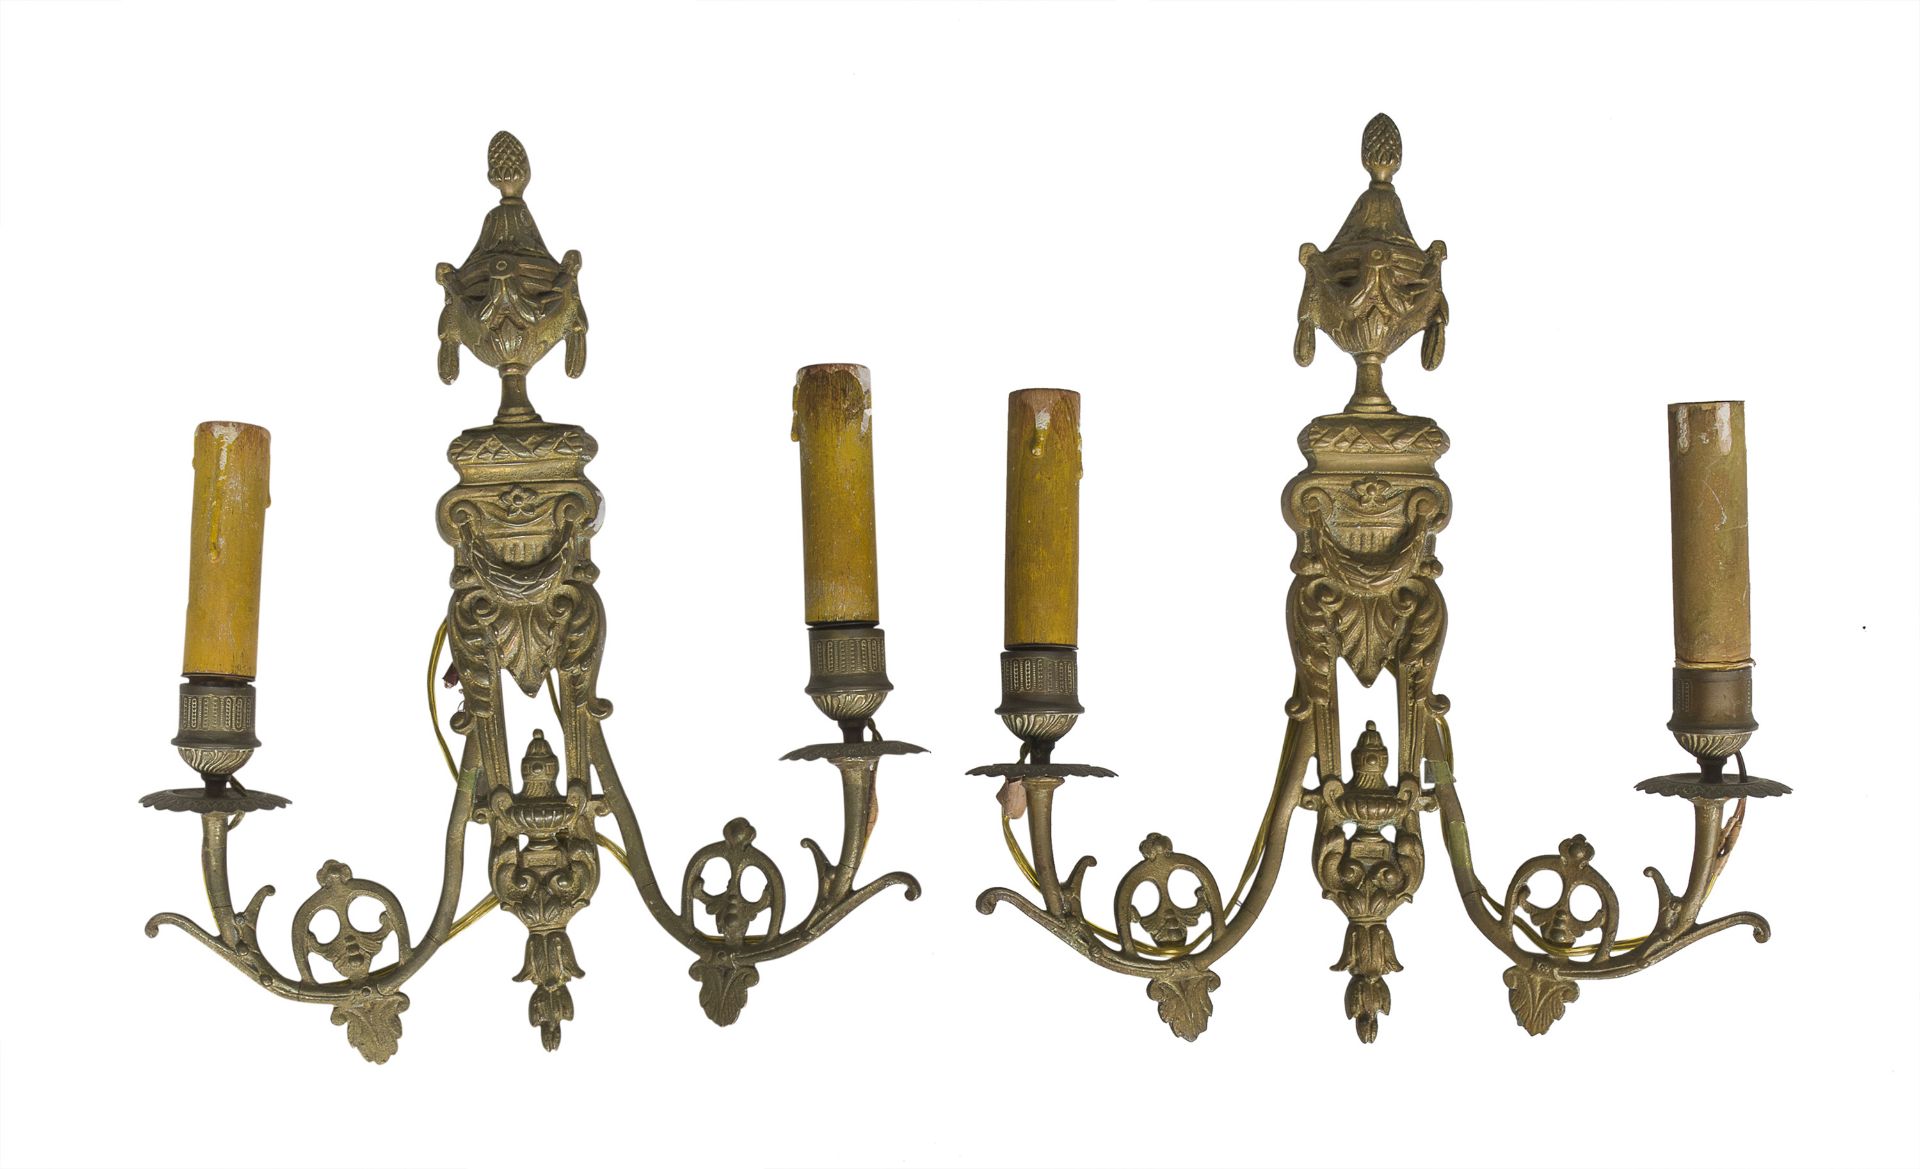 PAIR OF SMALL BRONZE WALL LAMPS END OF THE 19TH CENTURY